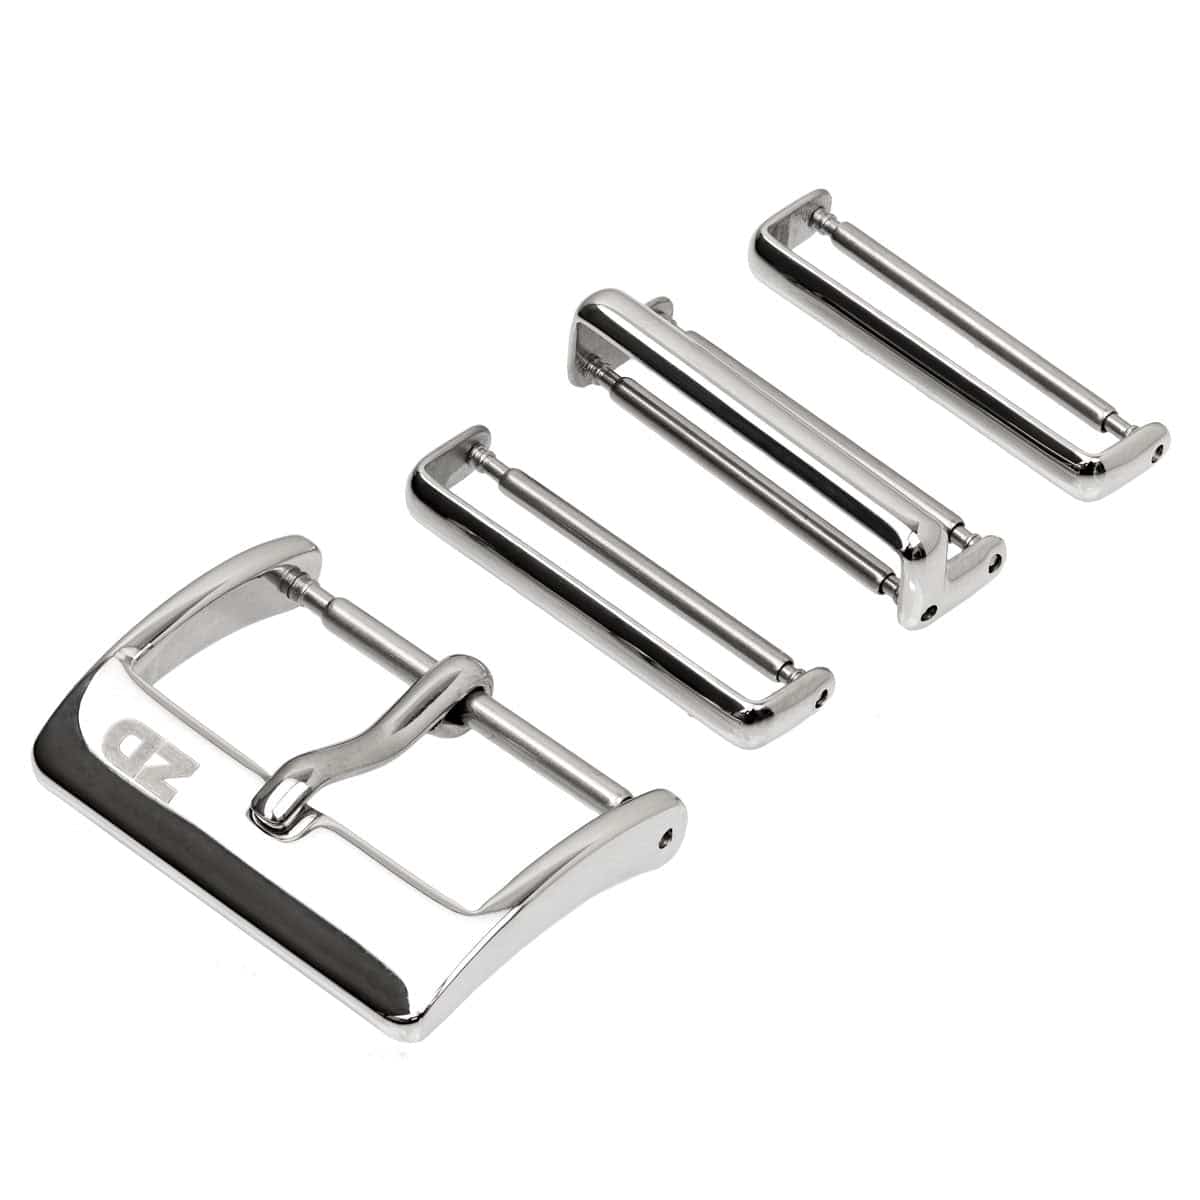 ZULUDIVER 328 Replacement Military Buckle Hardware - Polished